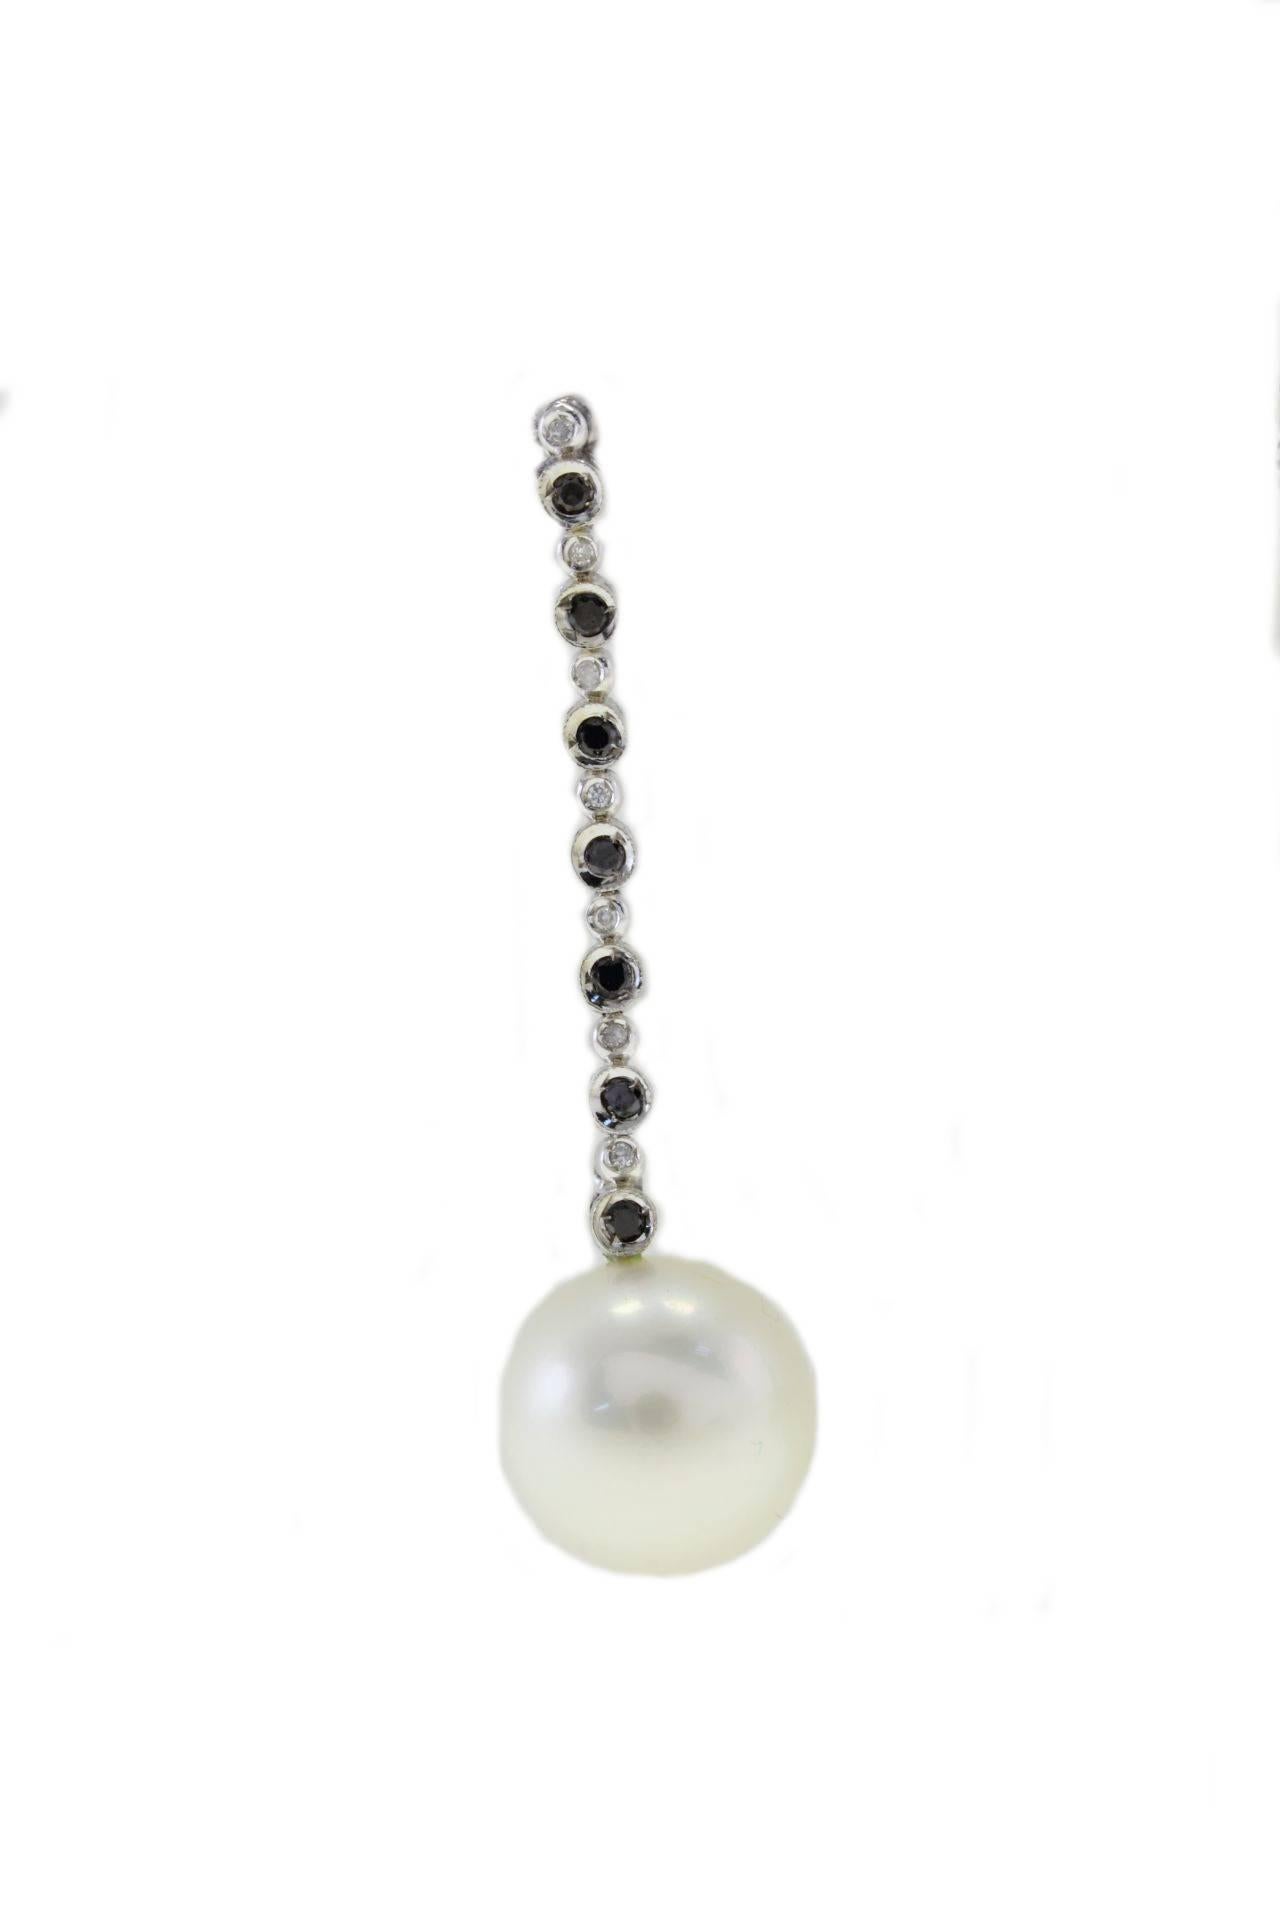 Dangle earrings in 14Kt white gold with a chain of black and white diamonds  that links them to one pearl each with a diameter of 11/12mm.
Delightful pairs of earrings that you will not resist to wear in any occasion.

black and white diamonds